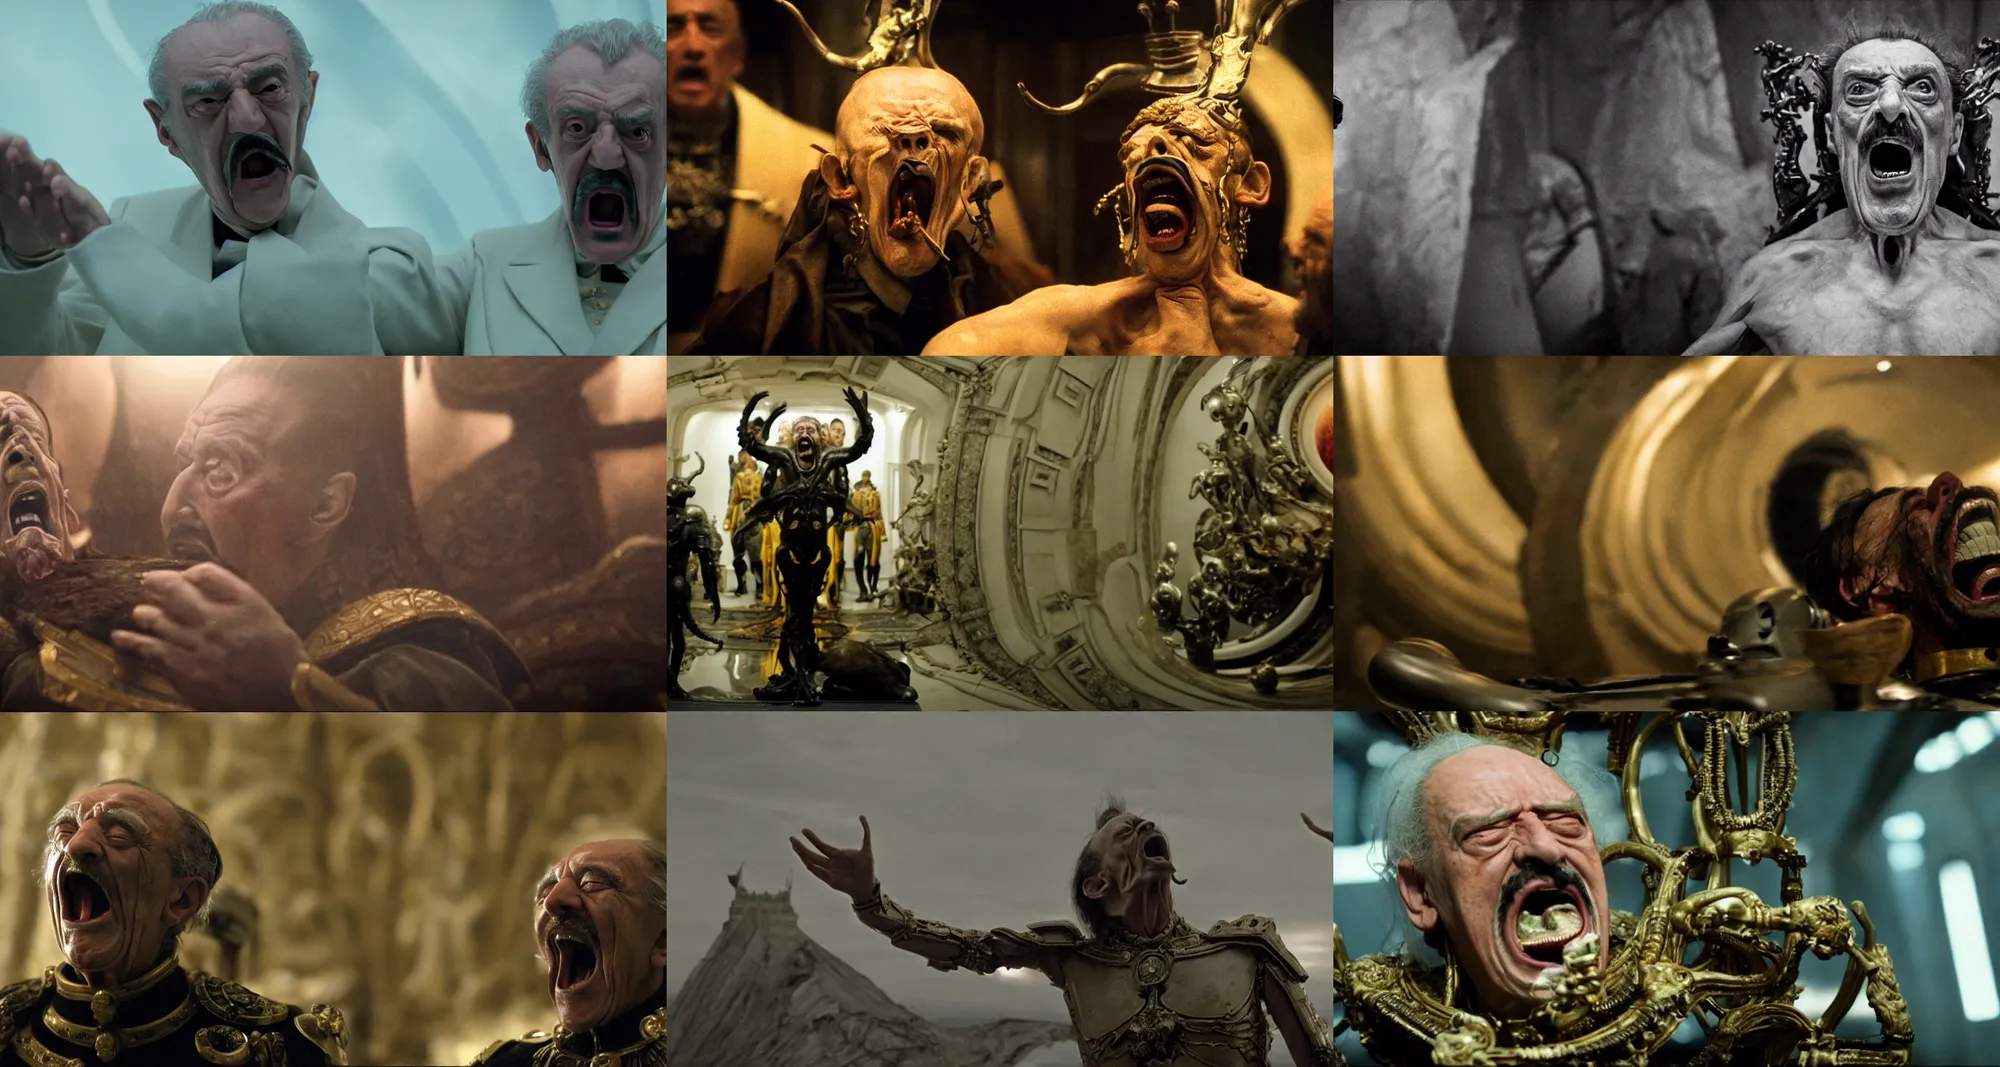 Prompt: the extreme long shot of screaming salvador dali in the role of emperor | still frame from the prometheus movie by ridley scott with cinematogrophy of christopher doyle, arri alexa, anamorphic bokeh and lens flares, 8 k, higly detailed masterpiece